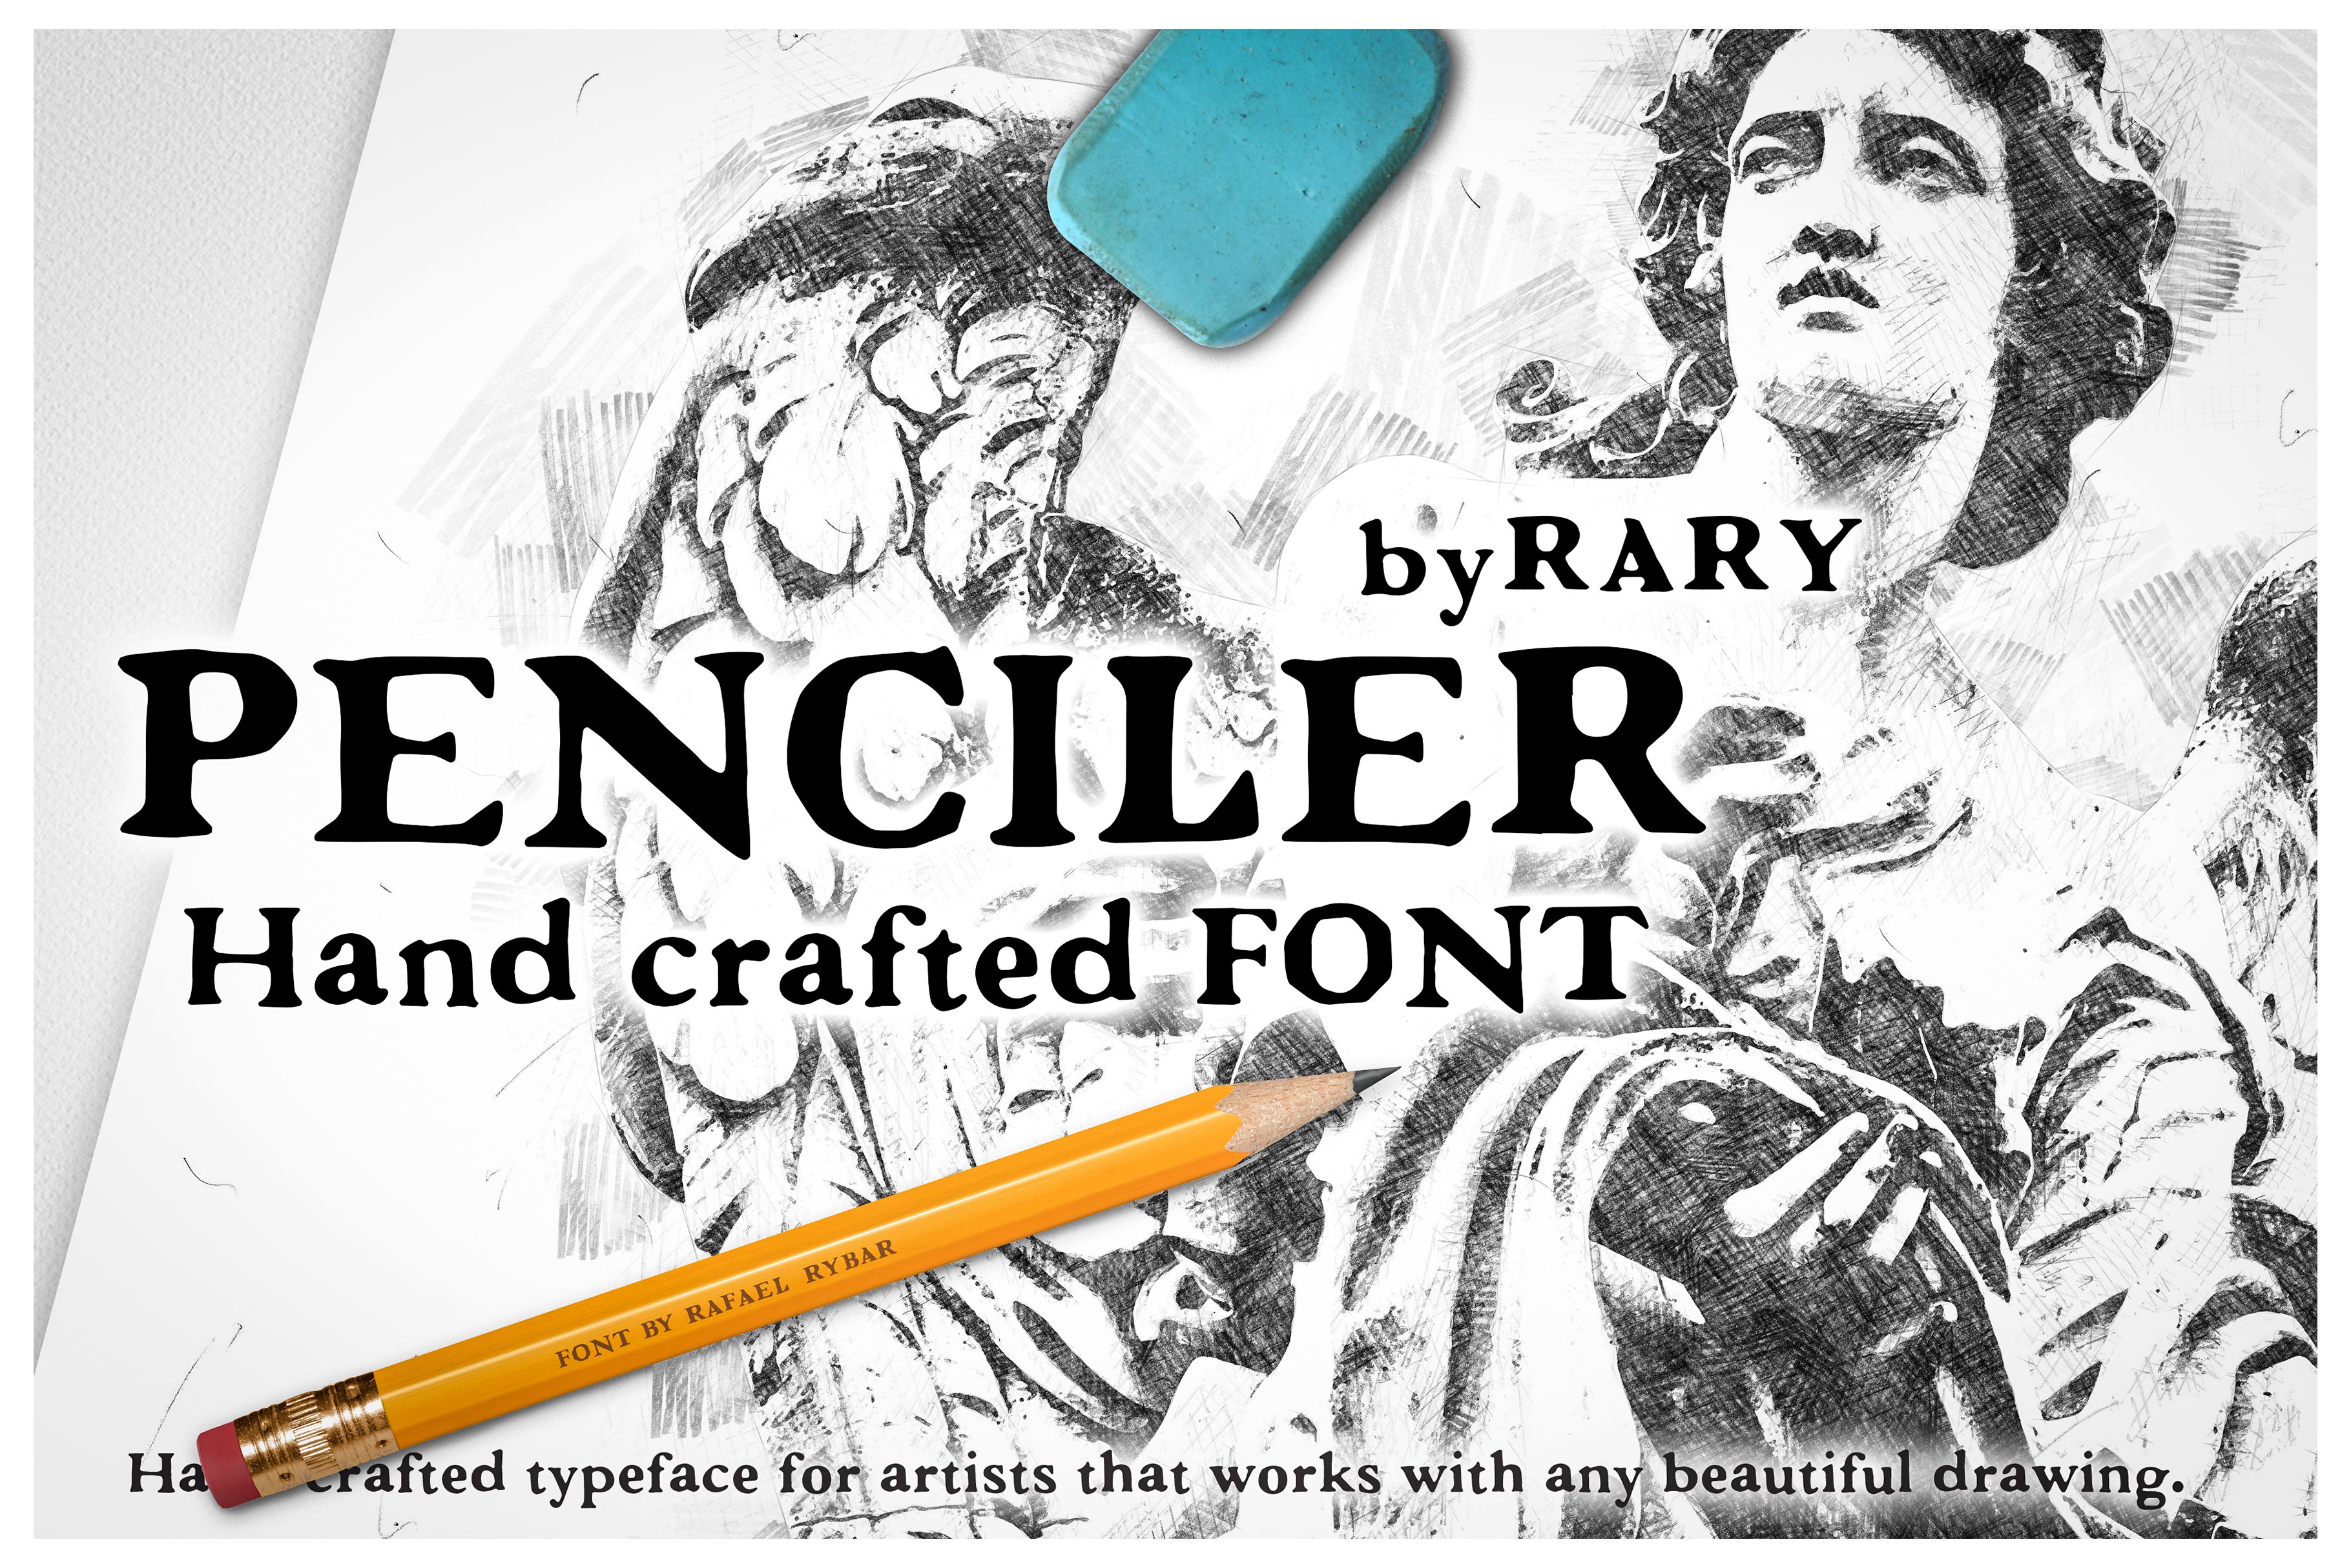 Penciler | Hand drawn font cover image.